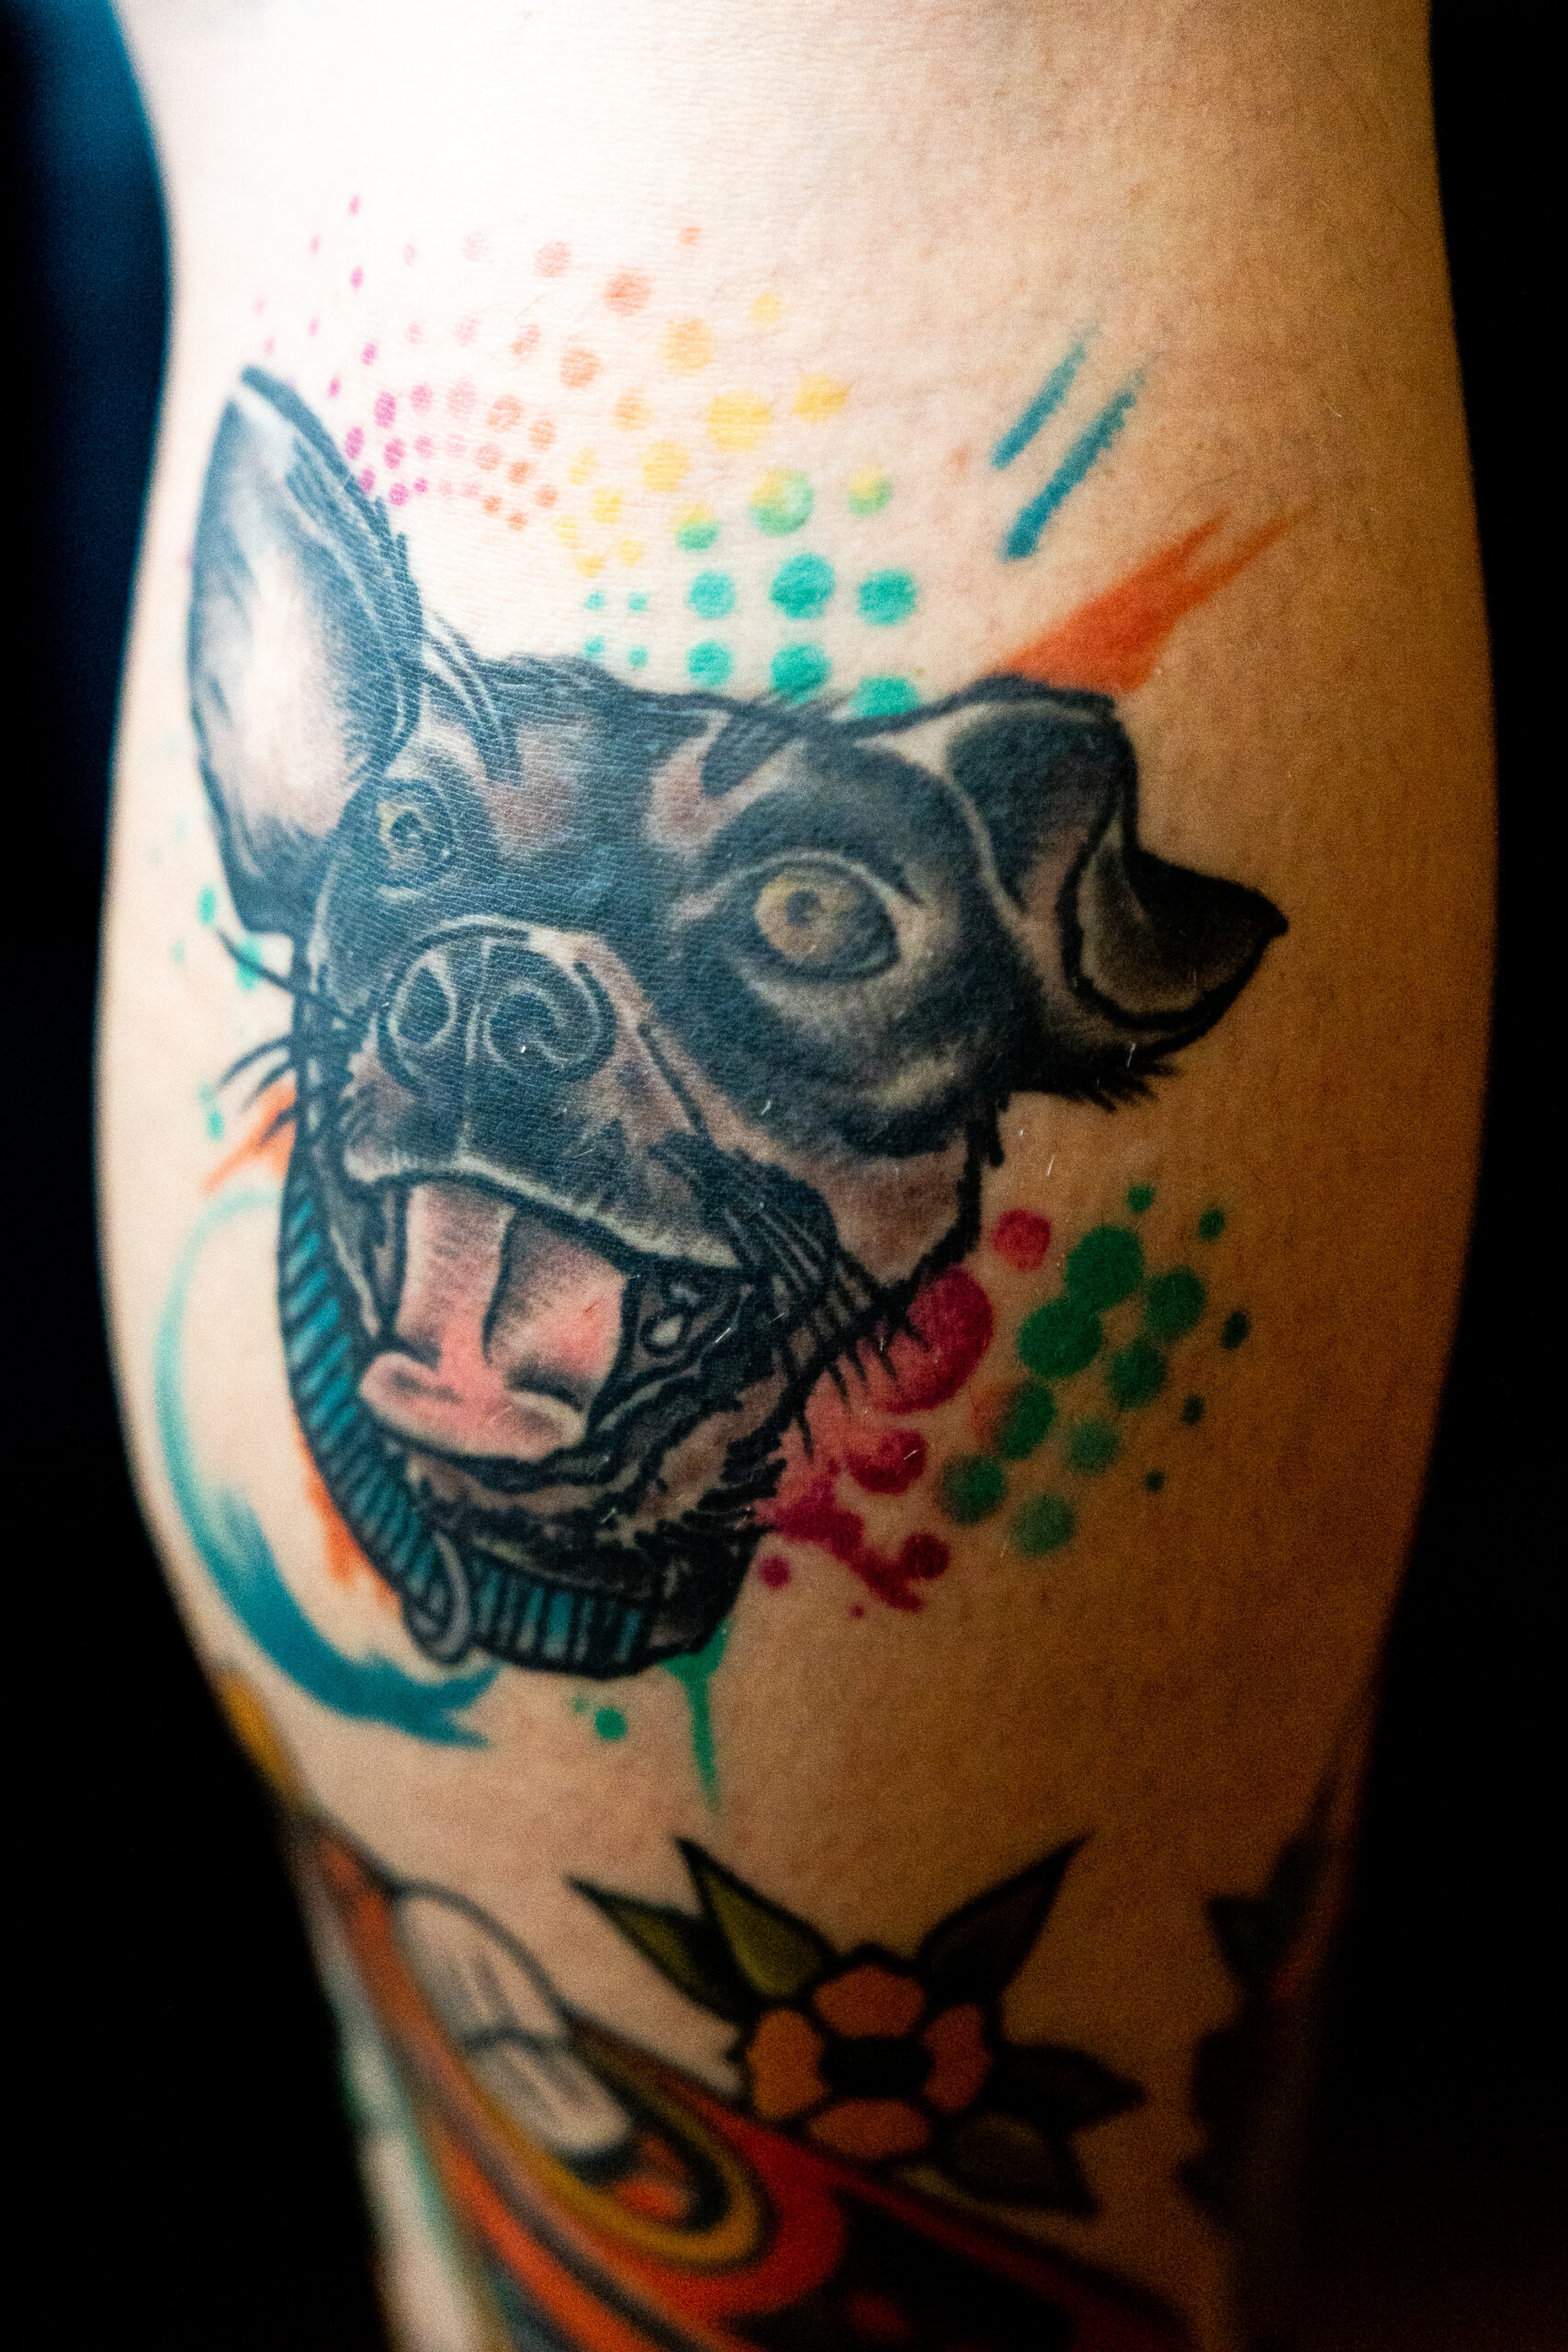 A closeup of a colorful tattoo on the back of a white woman’s calf of a dog with one floppy ear.